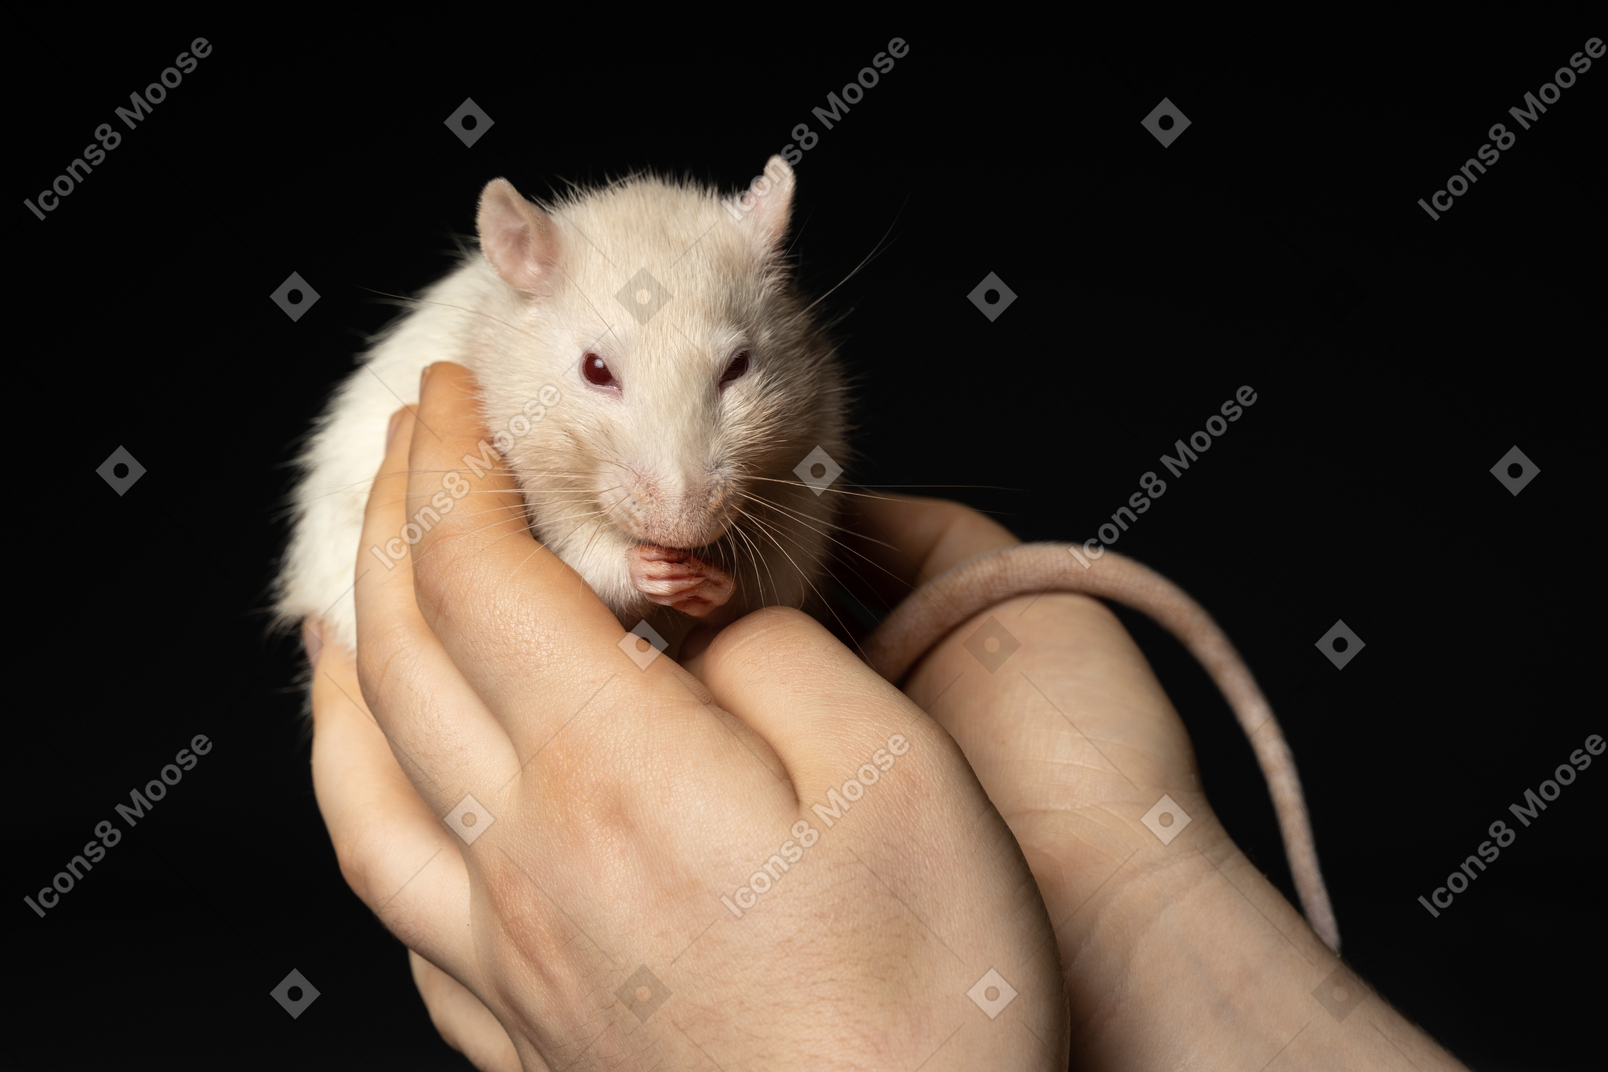 White mouse in human hands